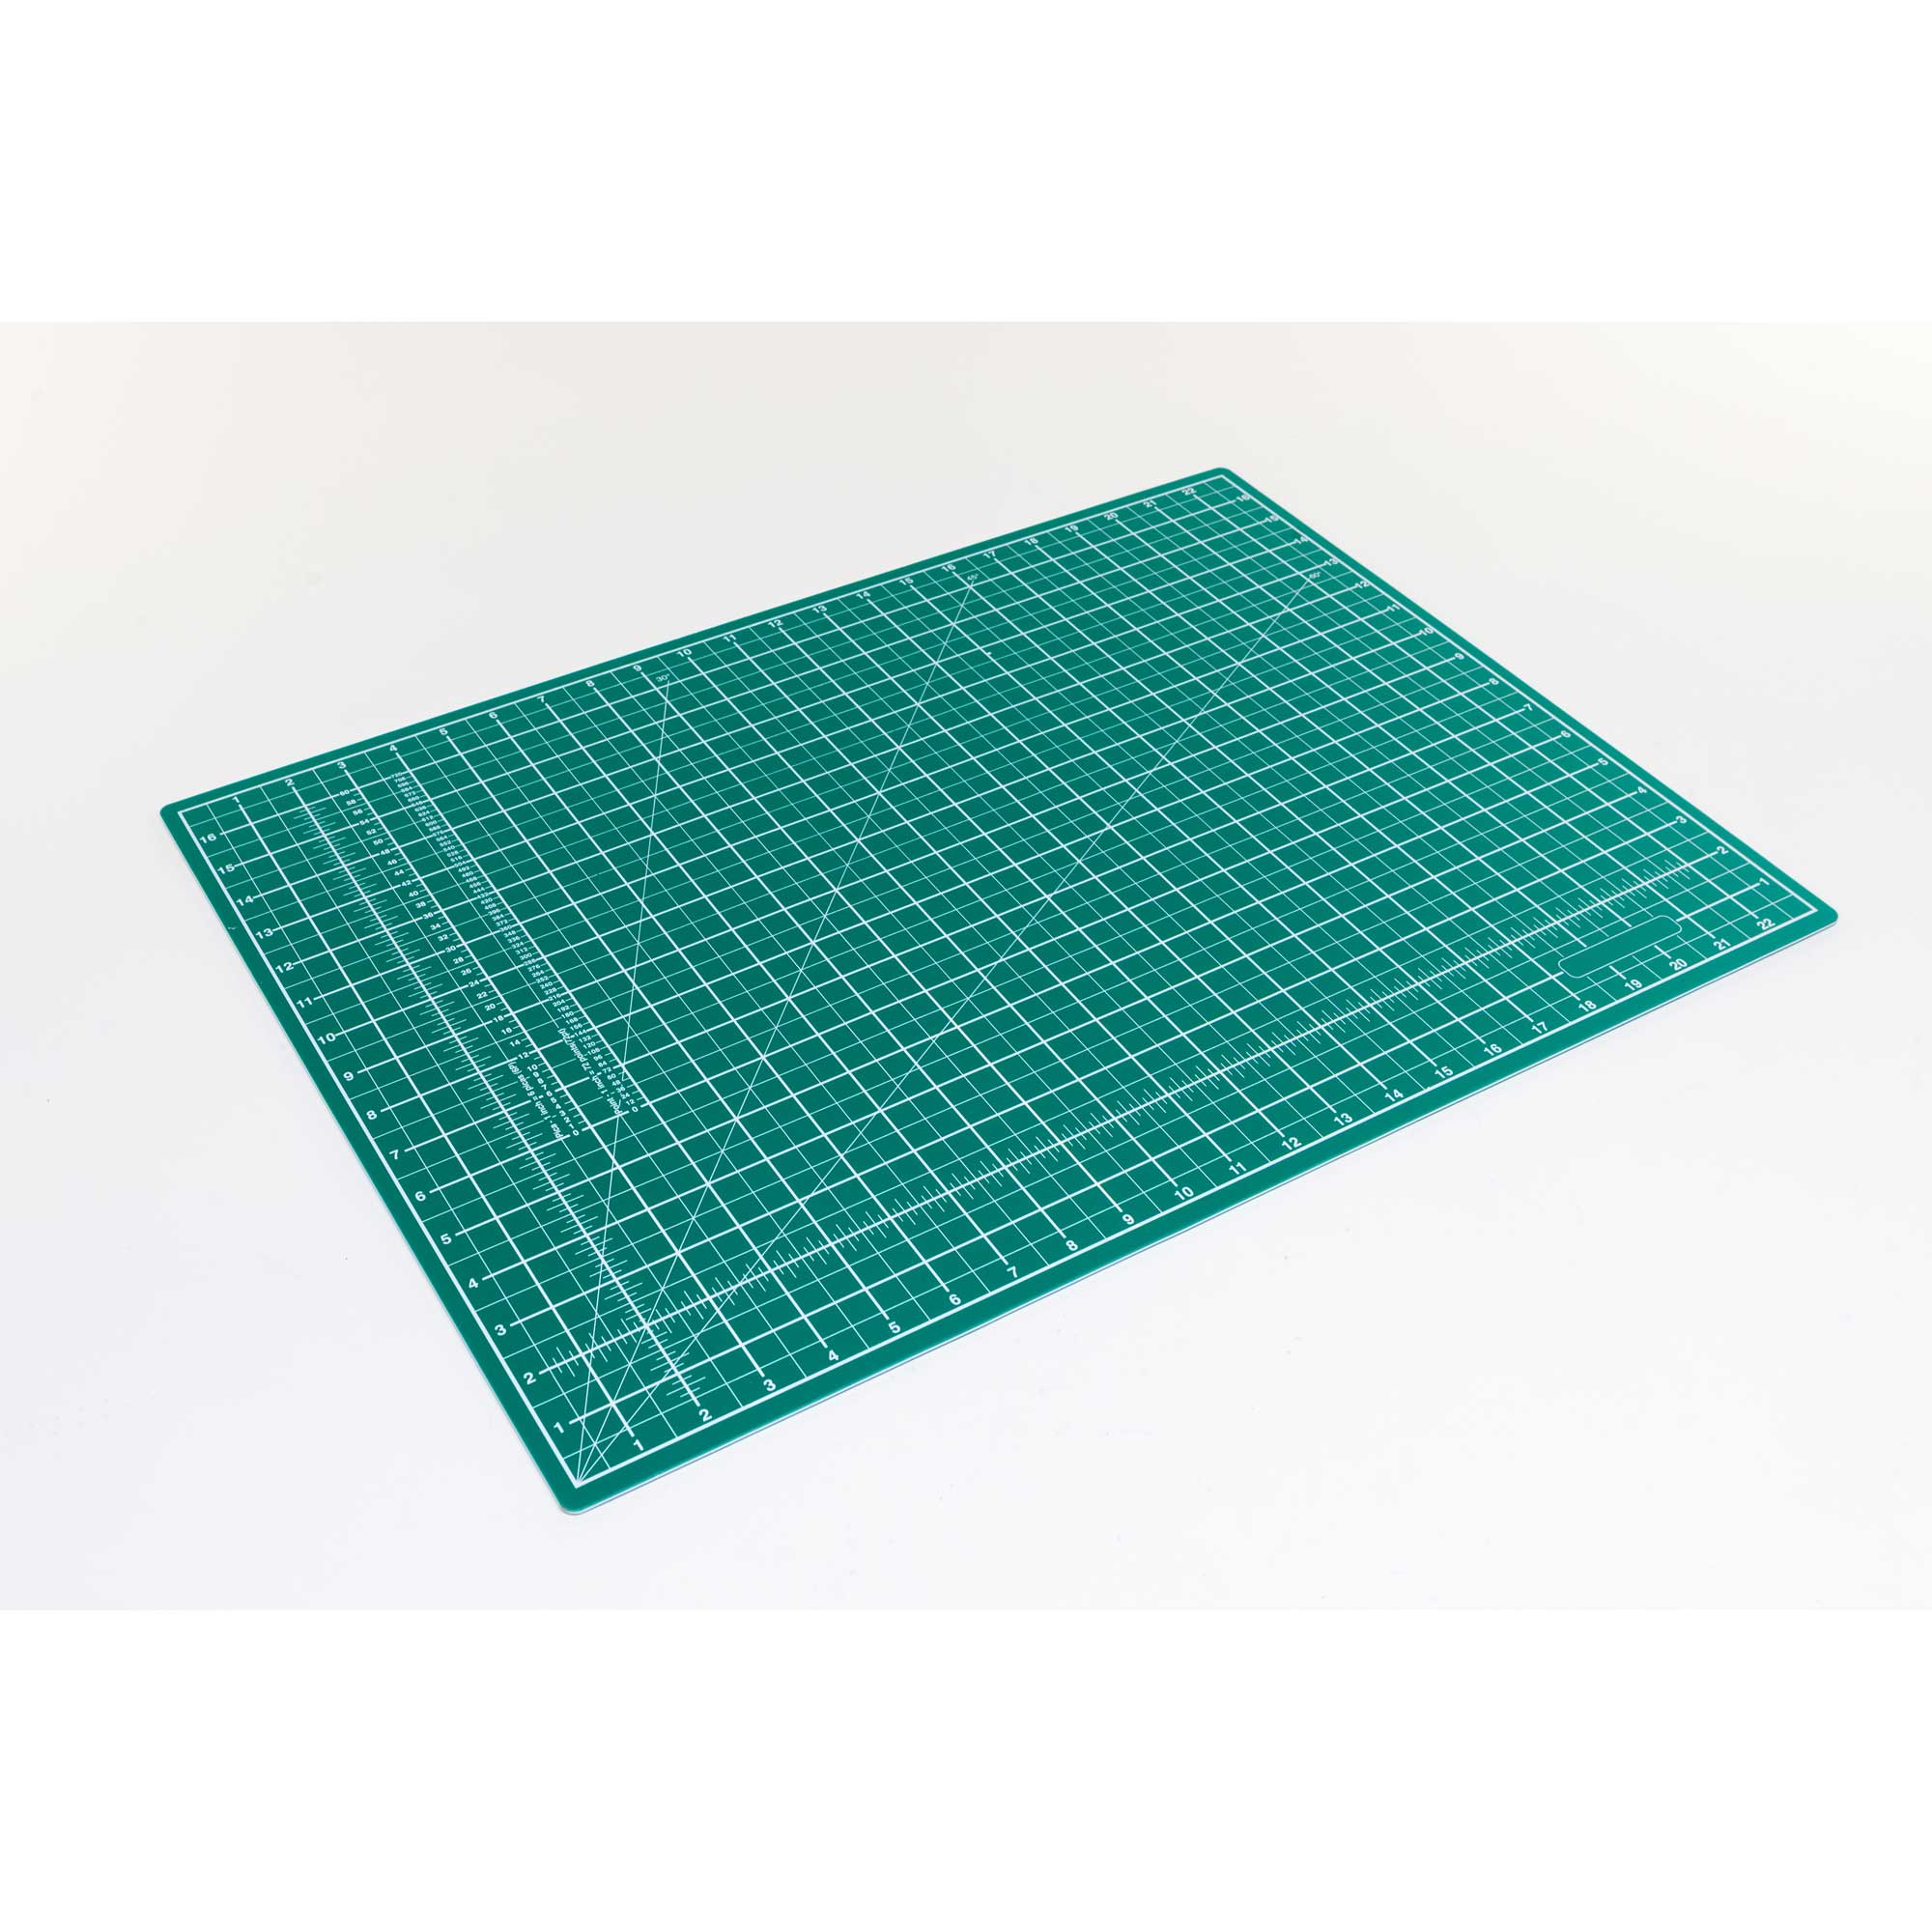 Breman Precision Self Healing Cutting Mat 18x24 Inch - Rotary Cutting Mats  for Crafts - Great Craft Cutting Board for Crafting & Quilting - 2 Sided 5